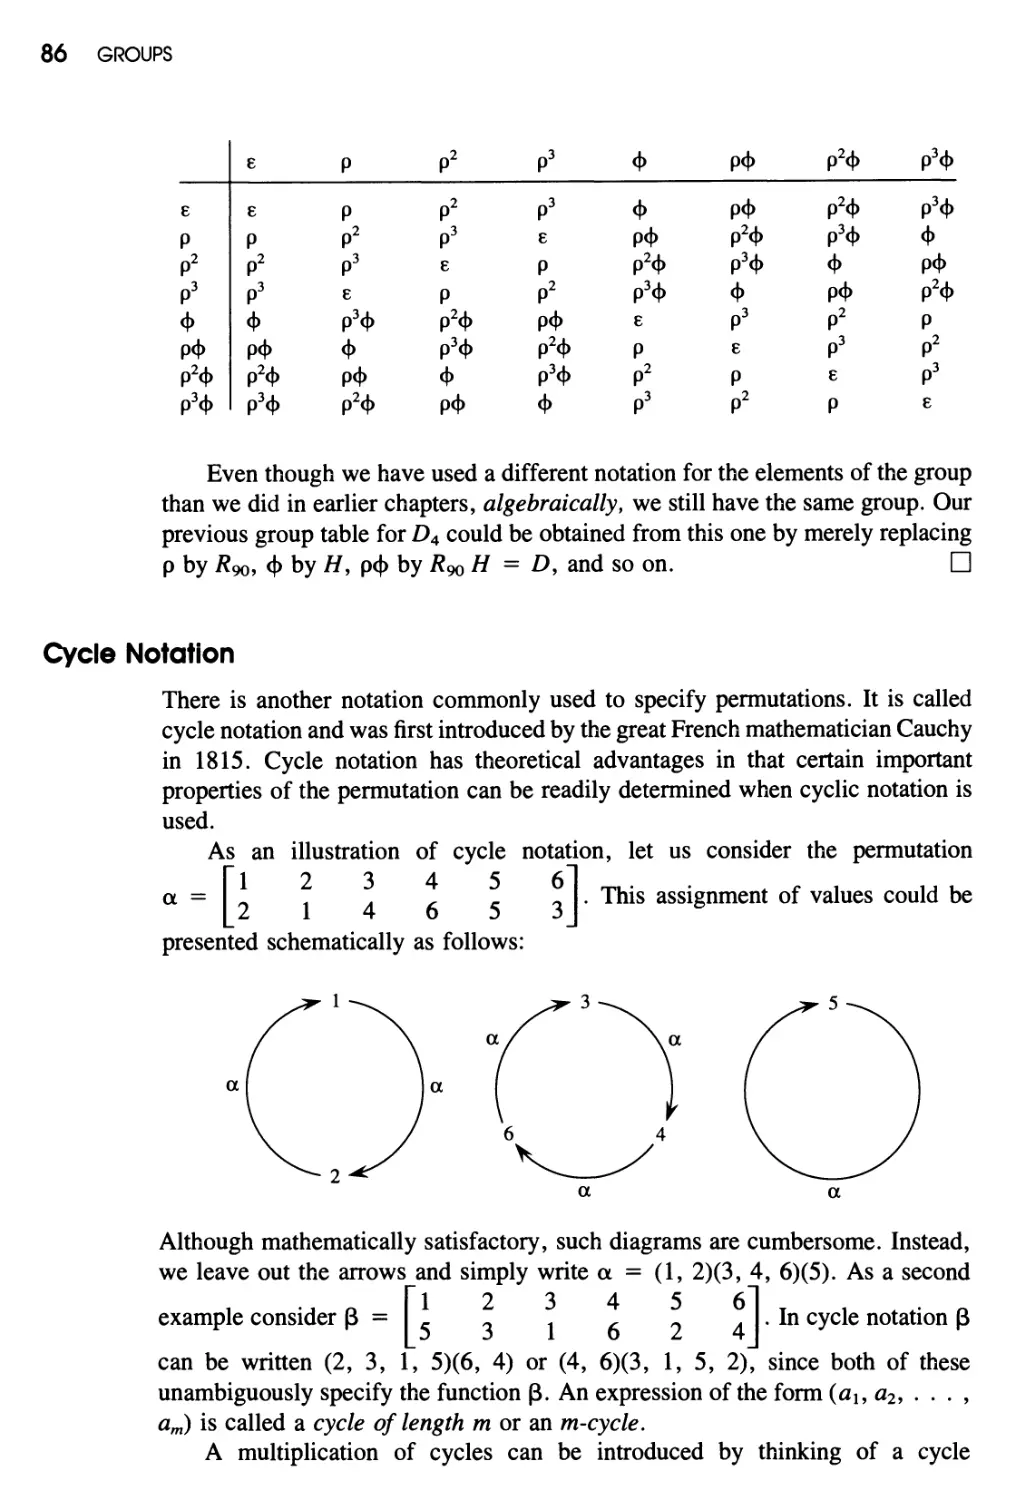 Cycle Notation